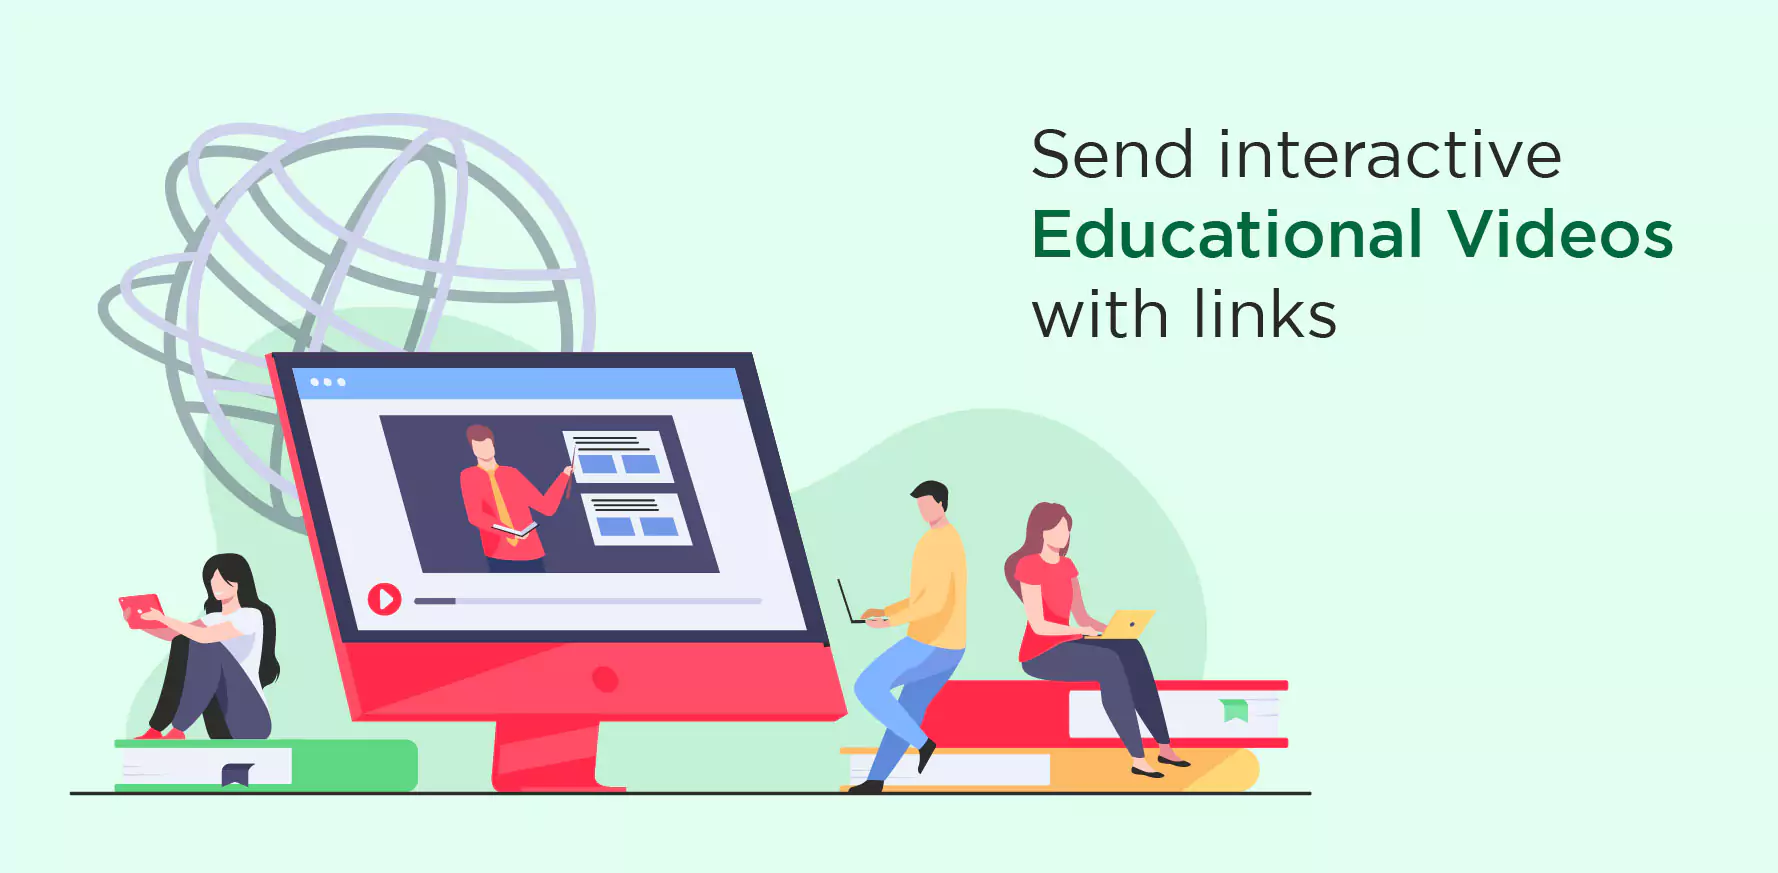 Send interactive educational videos with links: